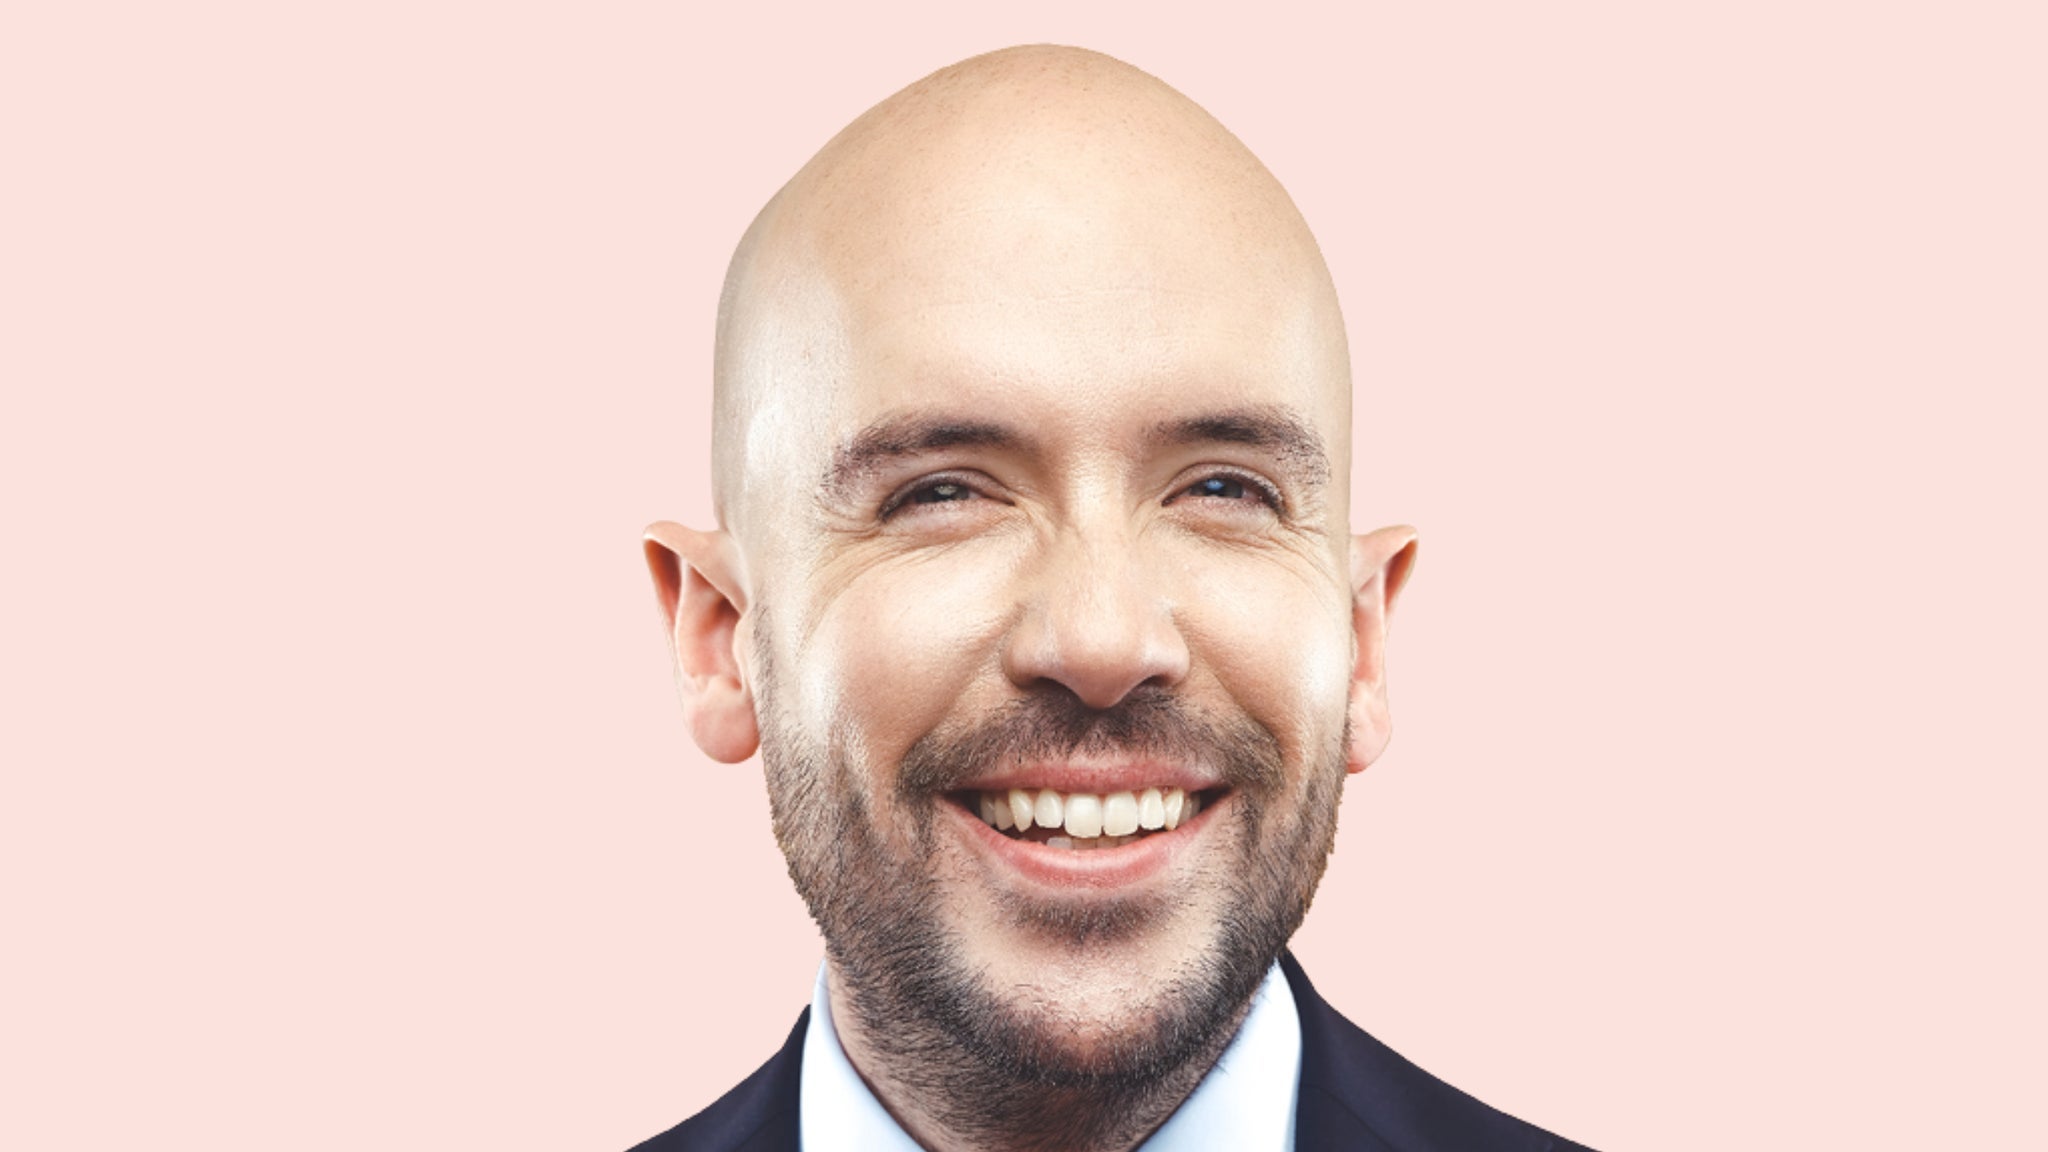 Image used with permission from Ticketmaster | Tom Allen - Completely tickets